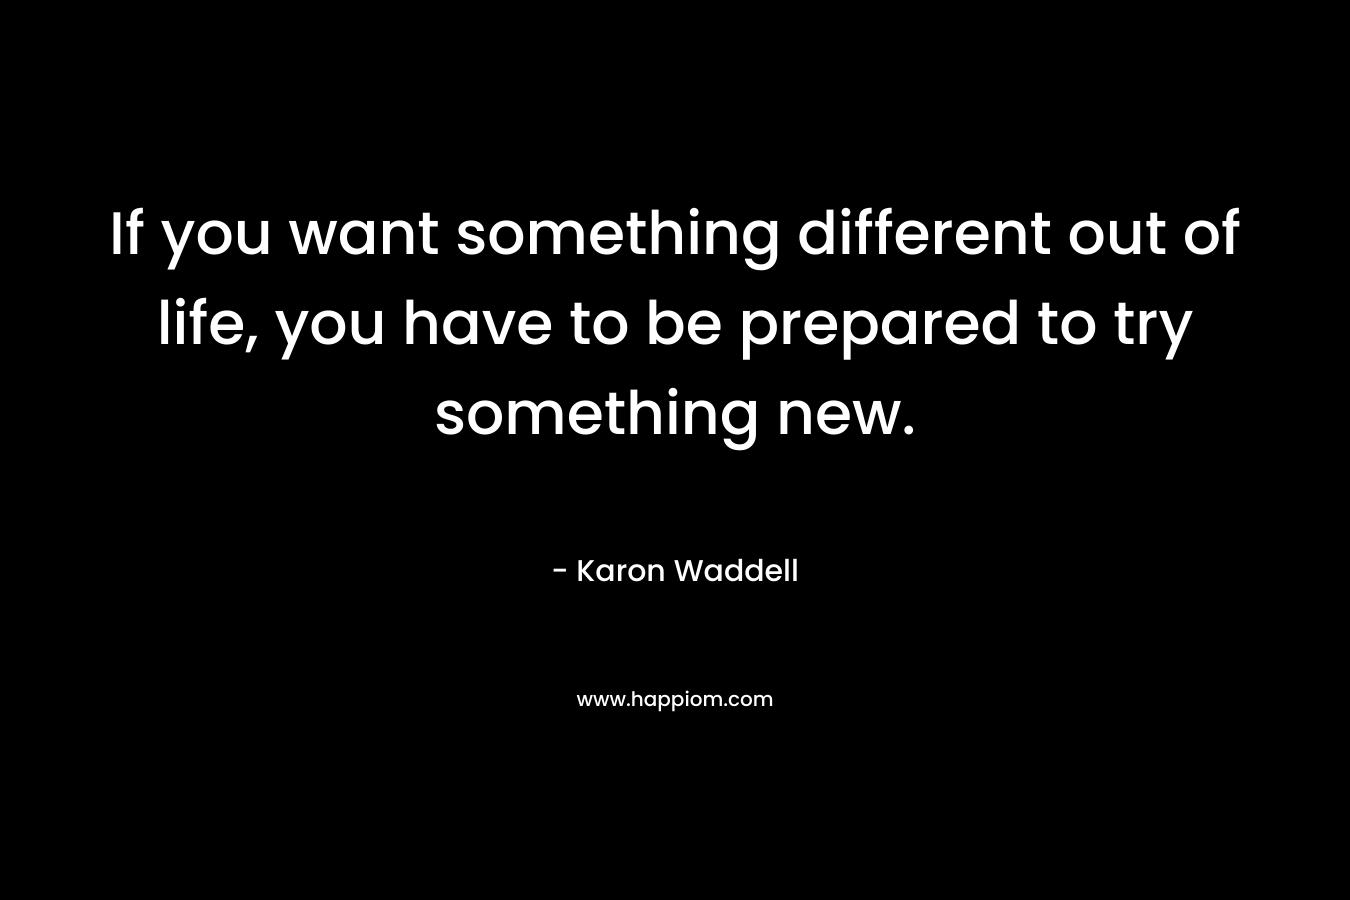 If you want something different out of life, you have to be prepared to try something new. – Karon Waddell